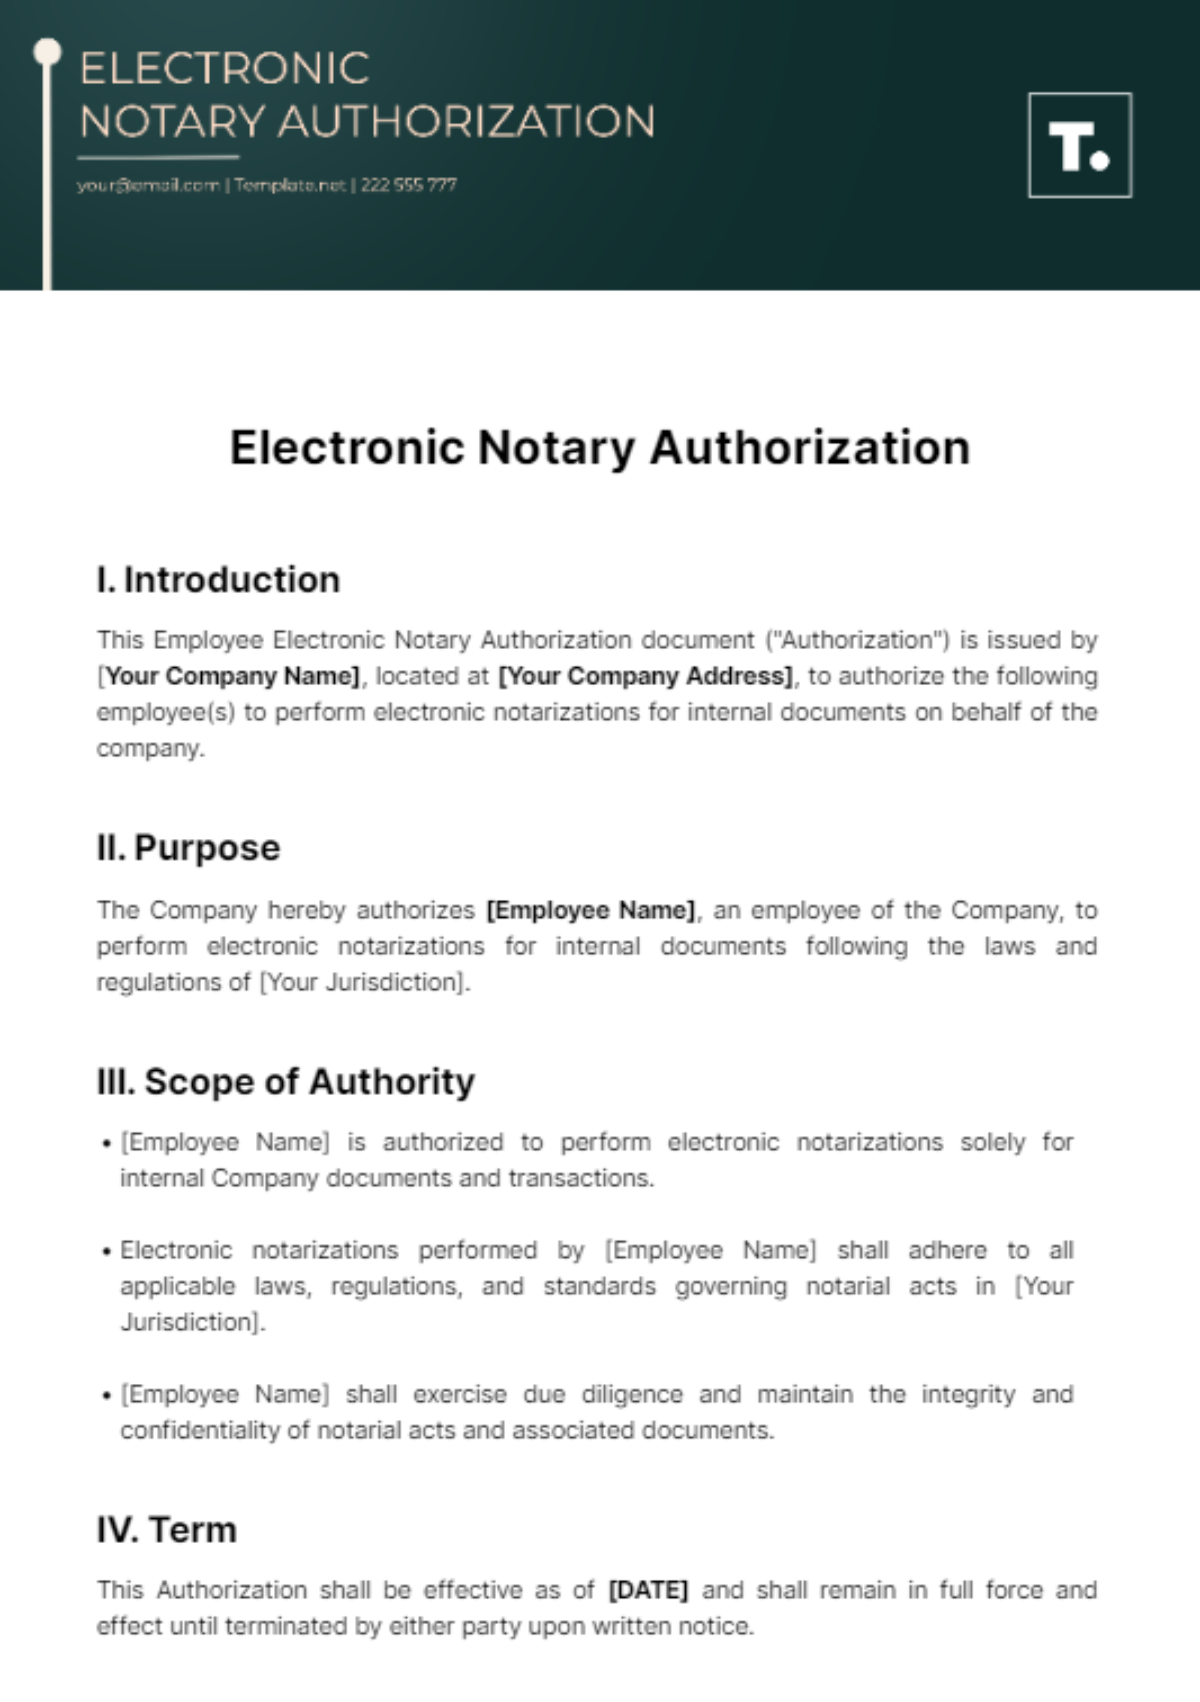 Electronic Notary Authorization Template